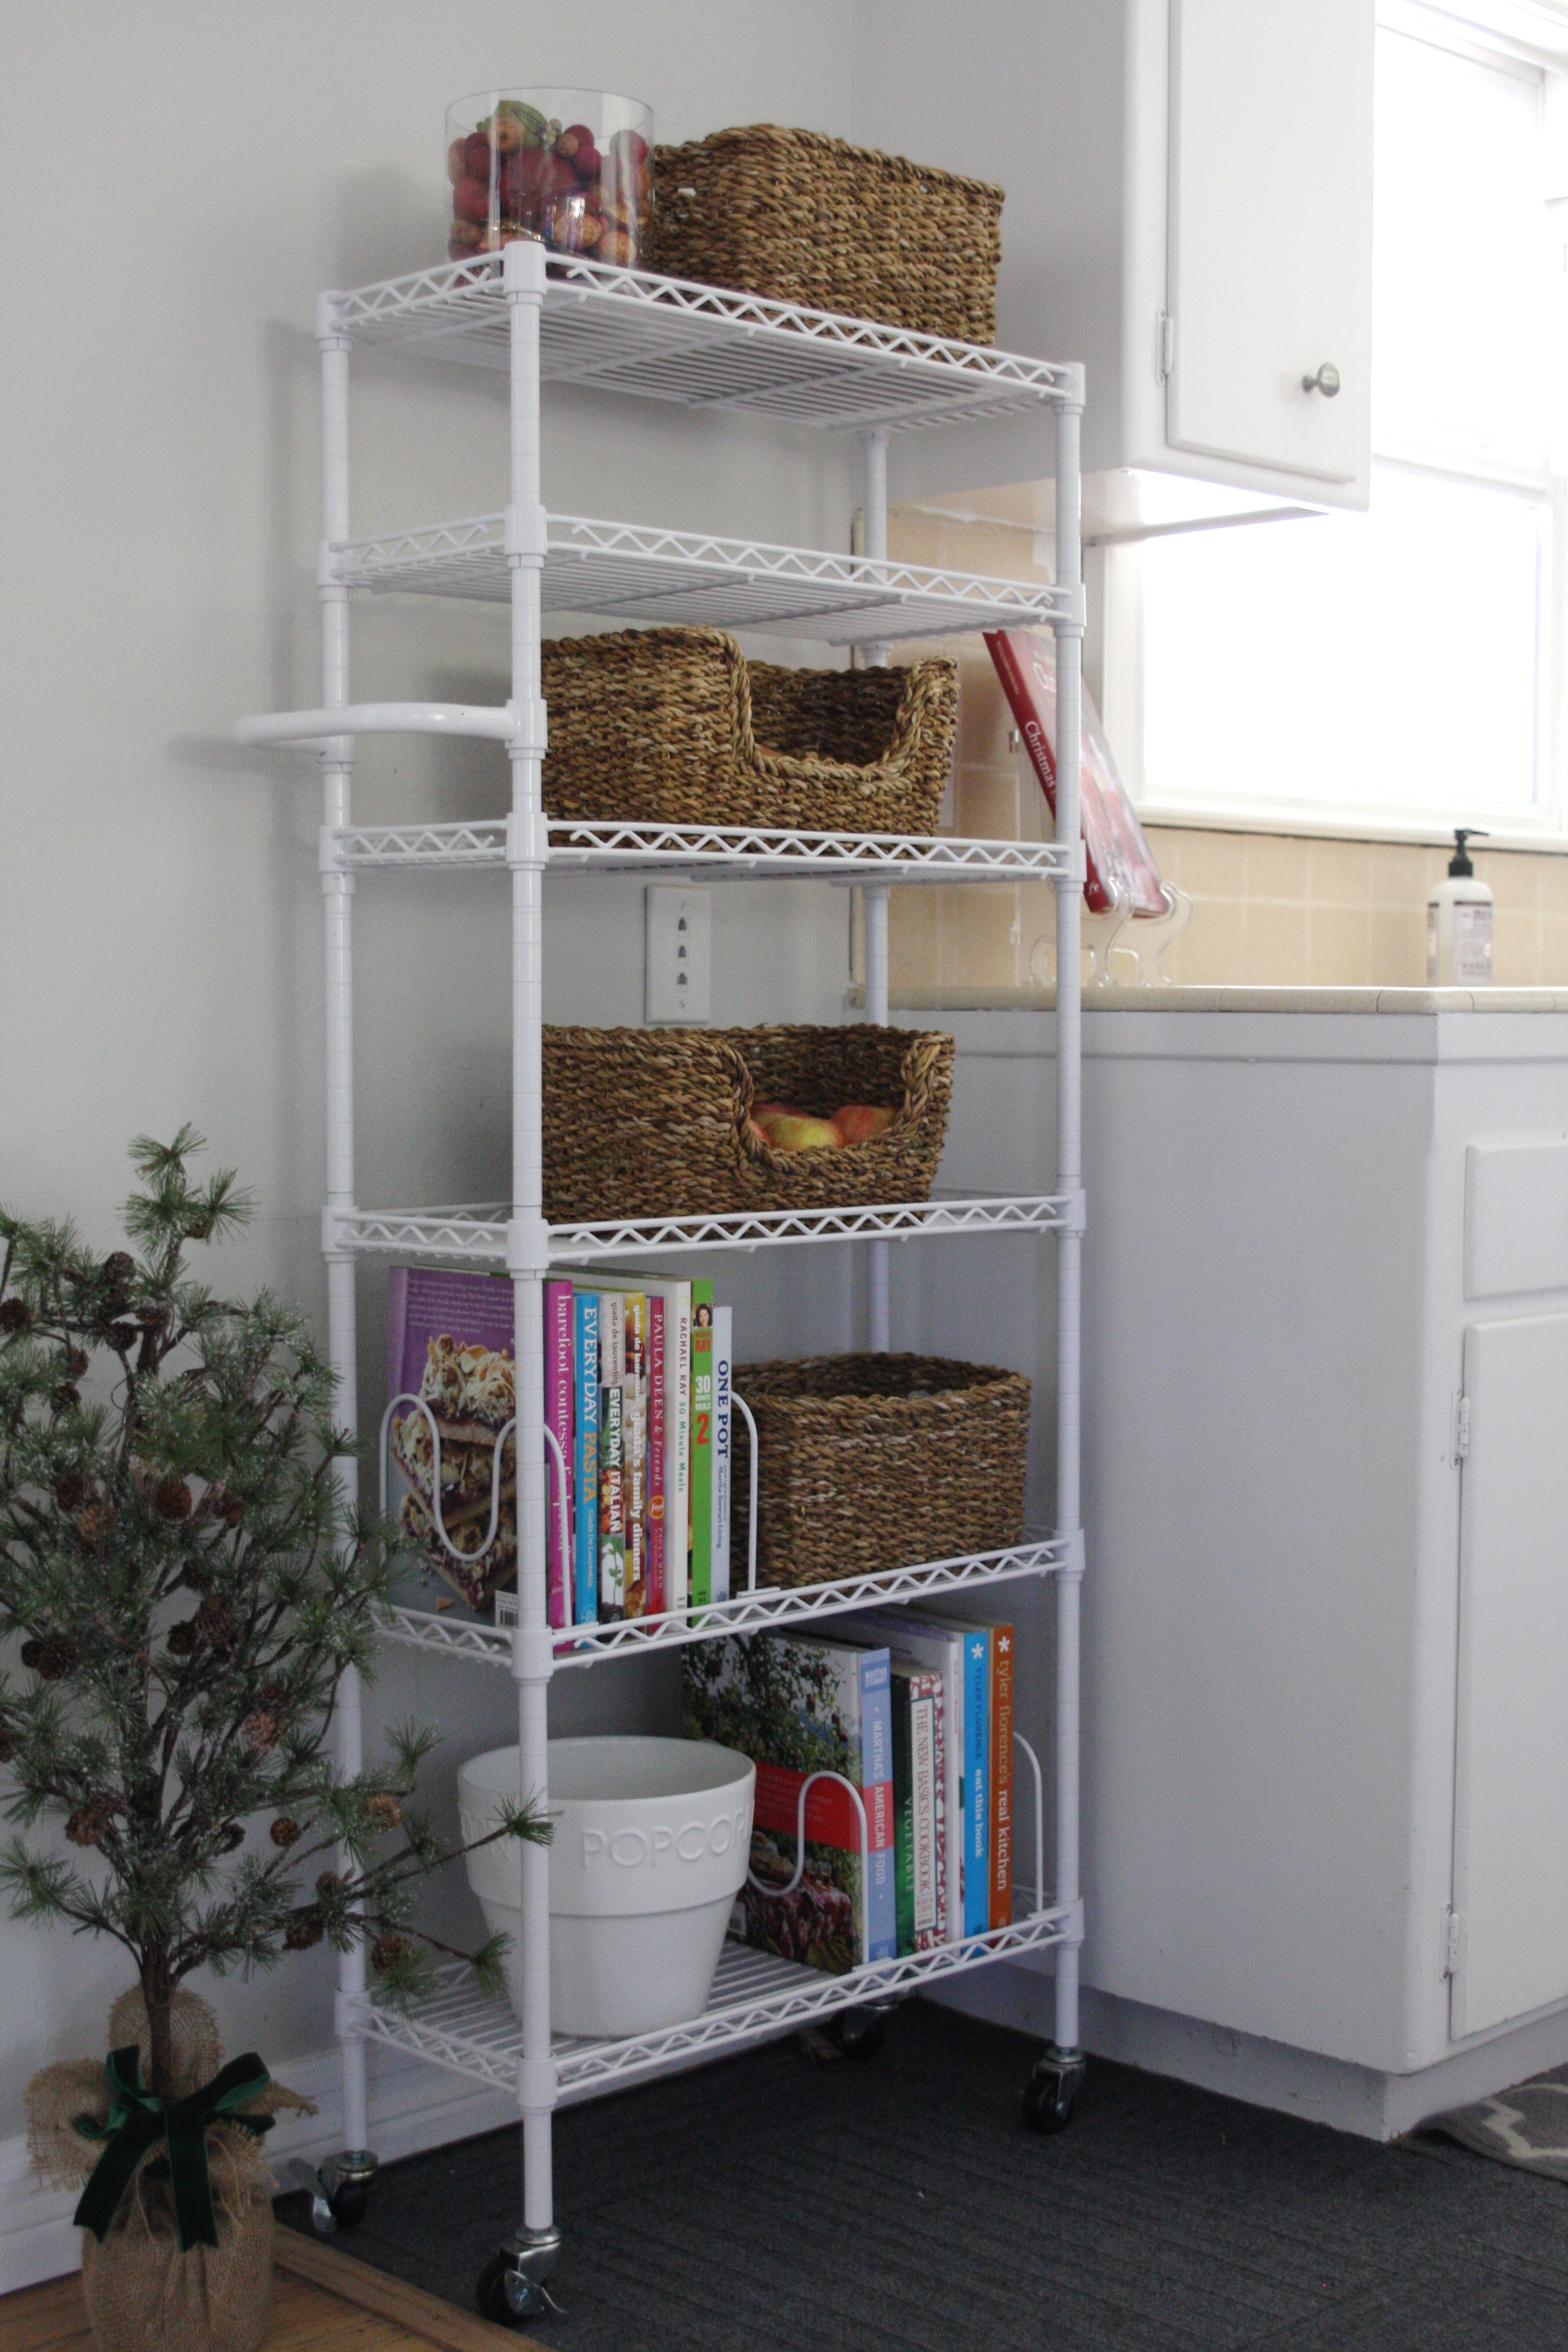 How To Use Under Shelf Baskets To Double Your Kitchen Cabinet Storage Space